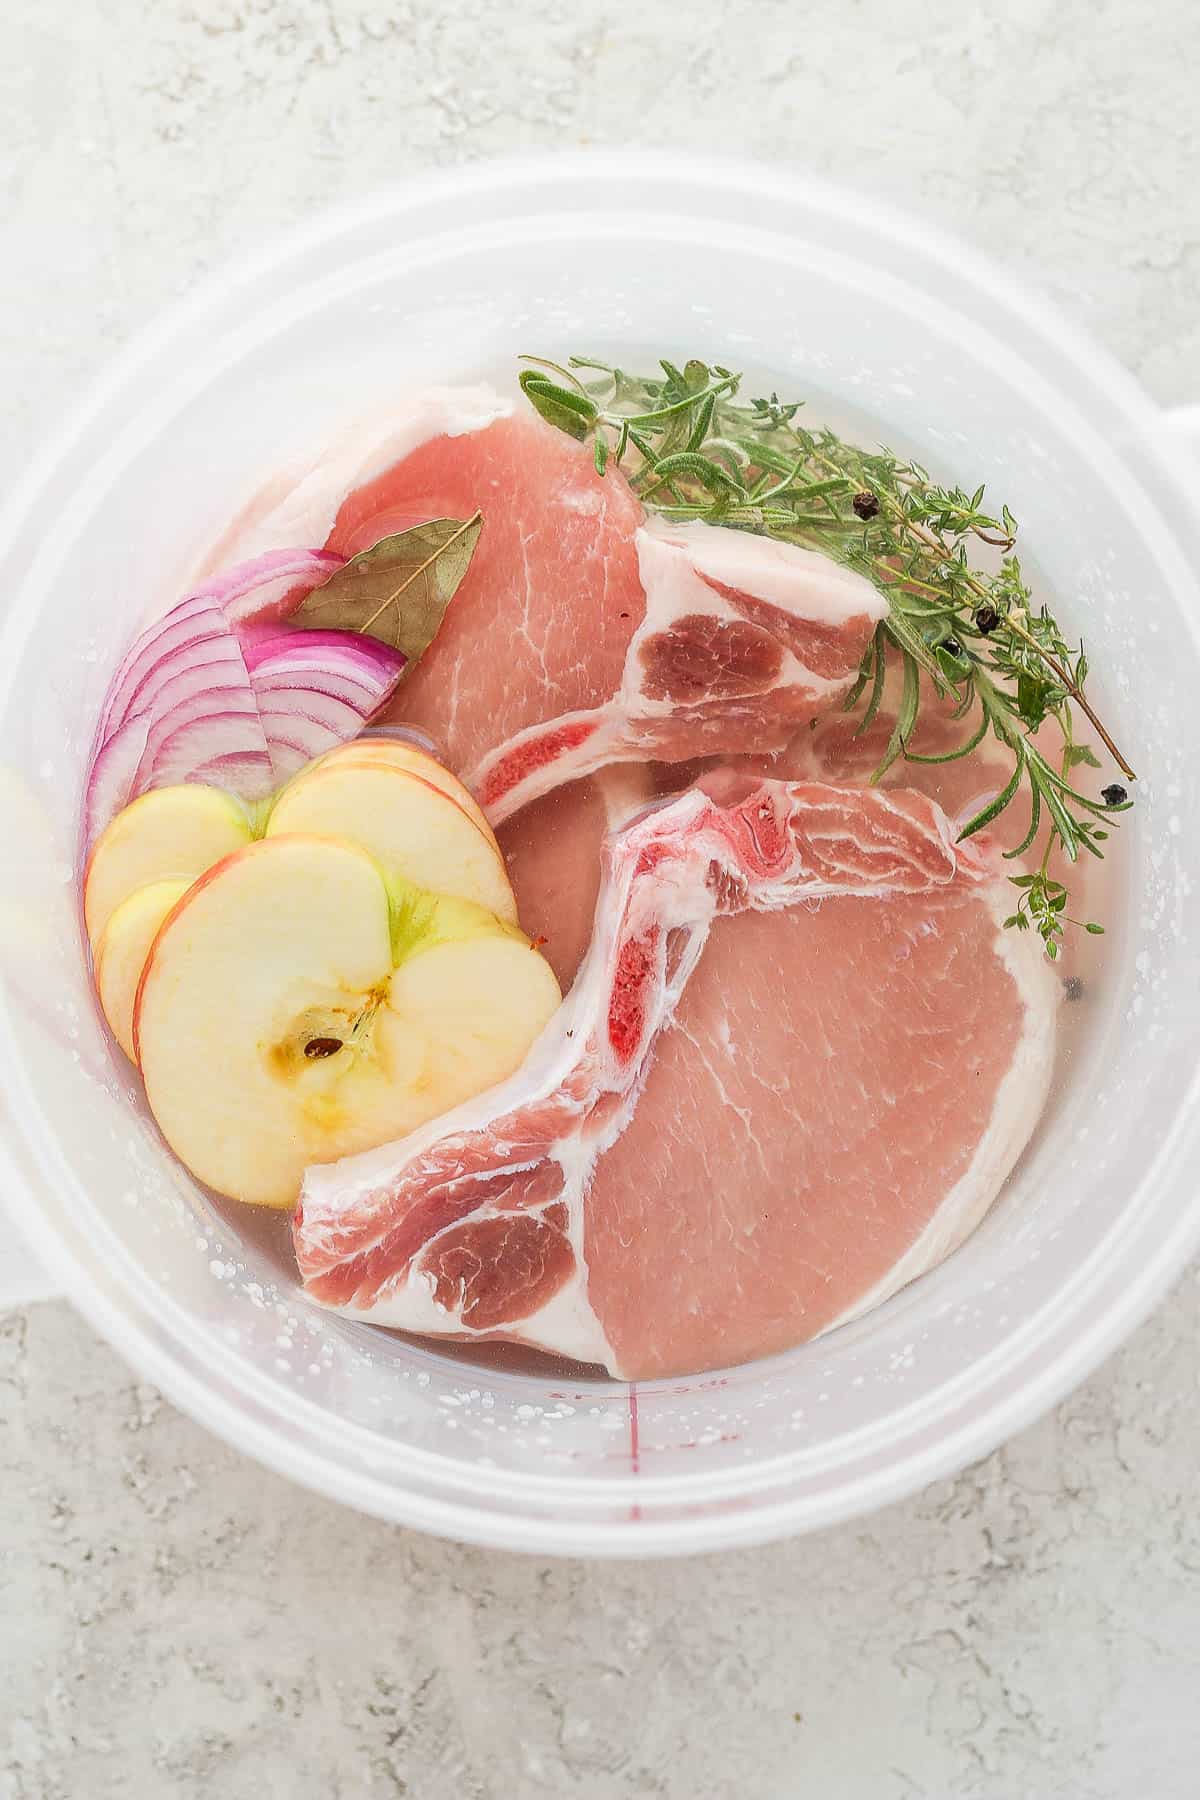 Brine mixture of water, salt, whole peppercorns, rosemary, thyme, bay leaf, onion, apple, and pork chops in a food safe container.